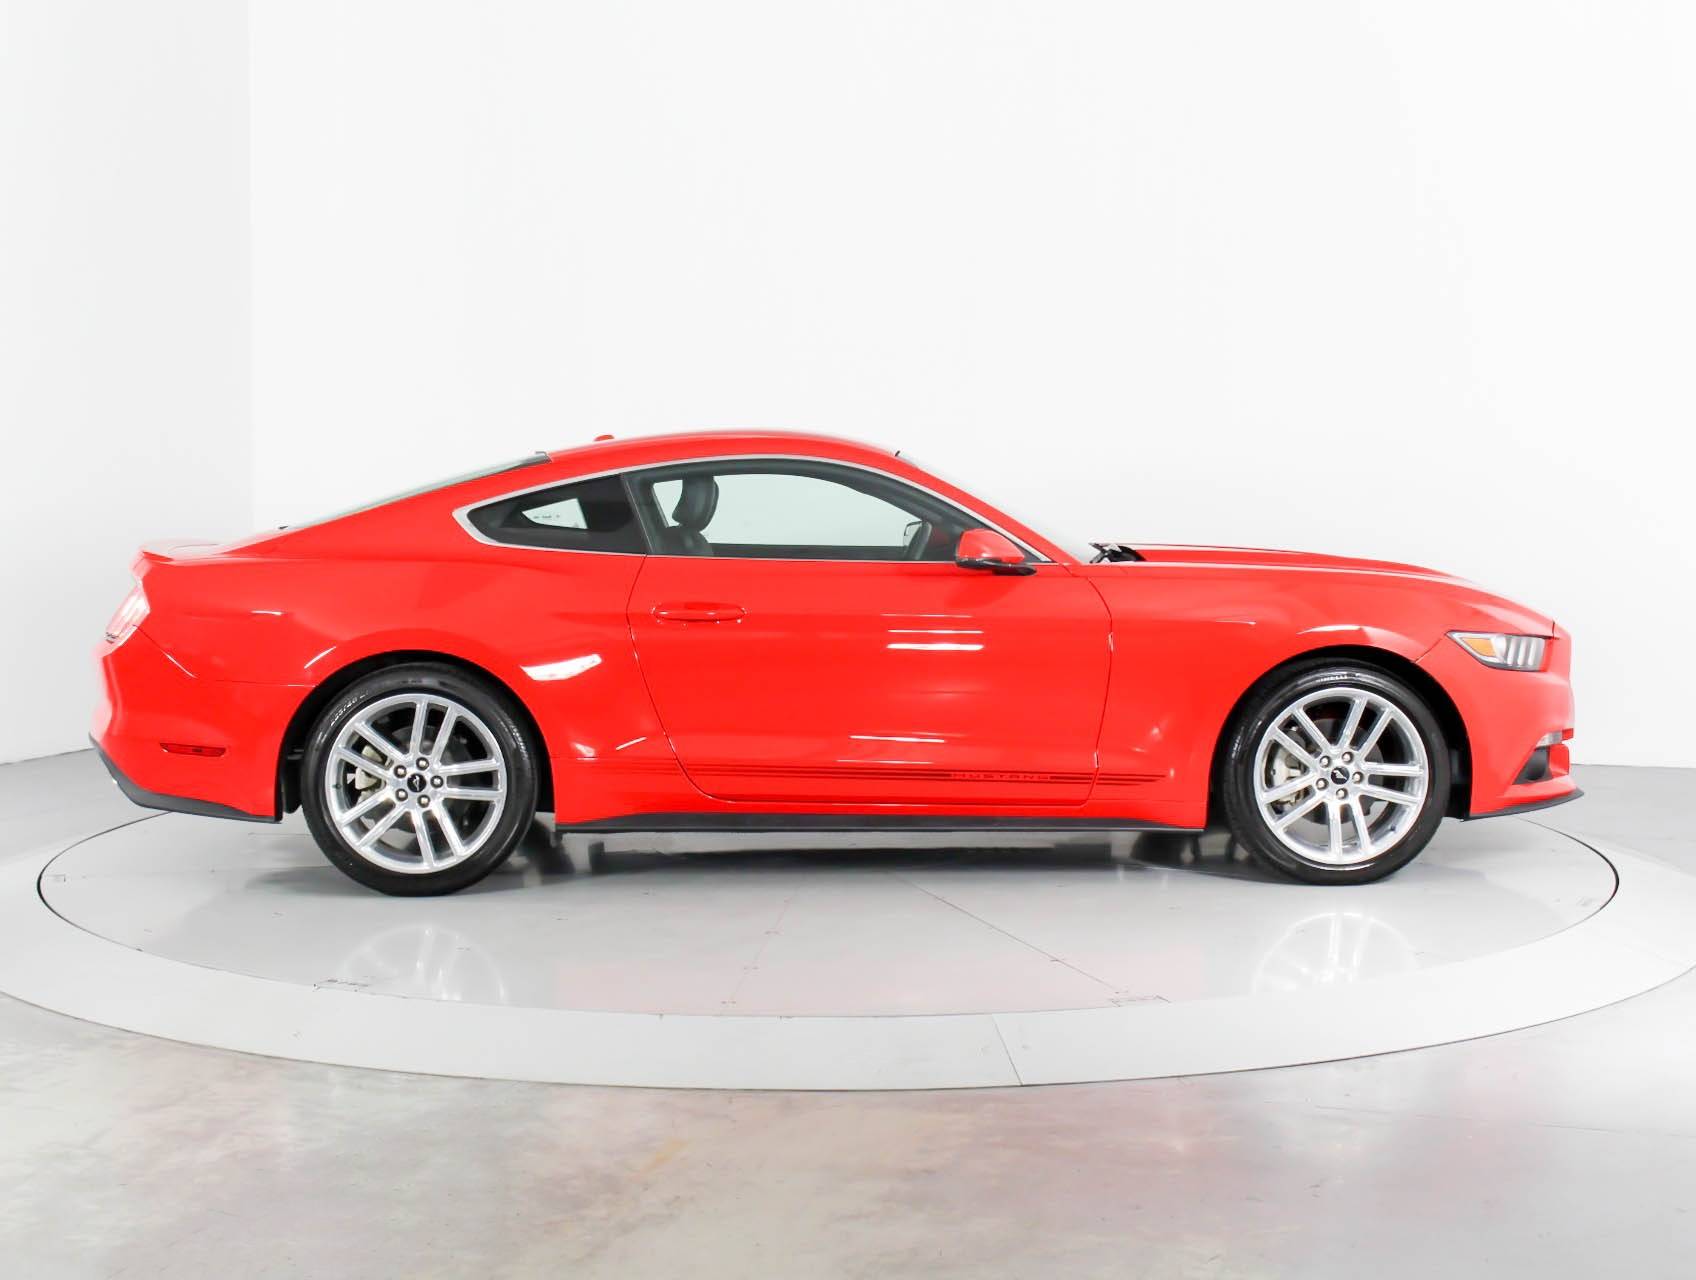 Florida Fine Cars - Used FORD MUSTANG 2016 HOLLYWOOD Ecoboost Premium